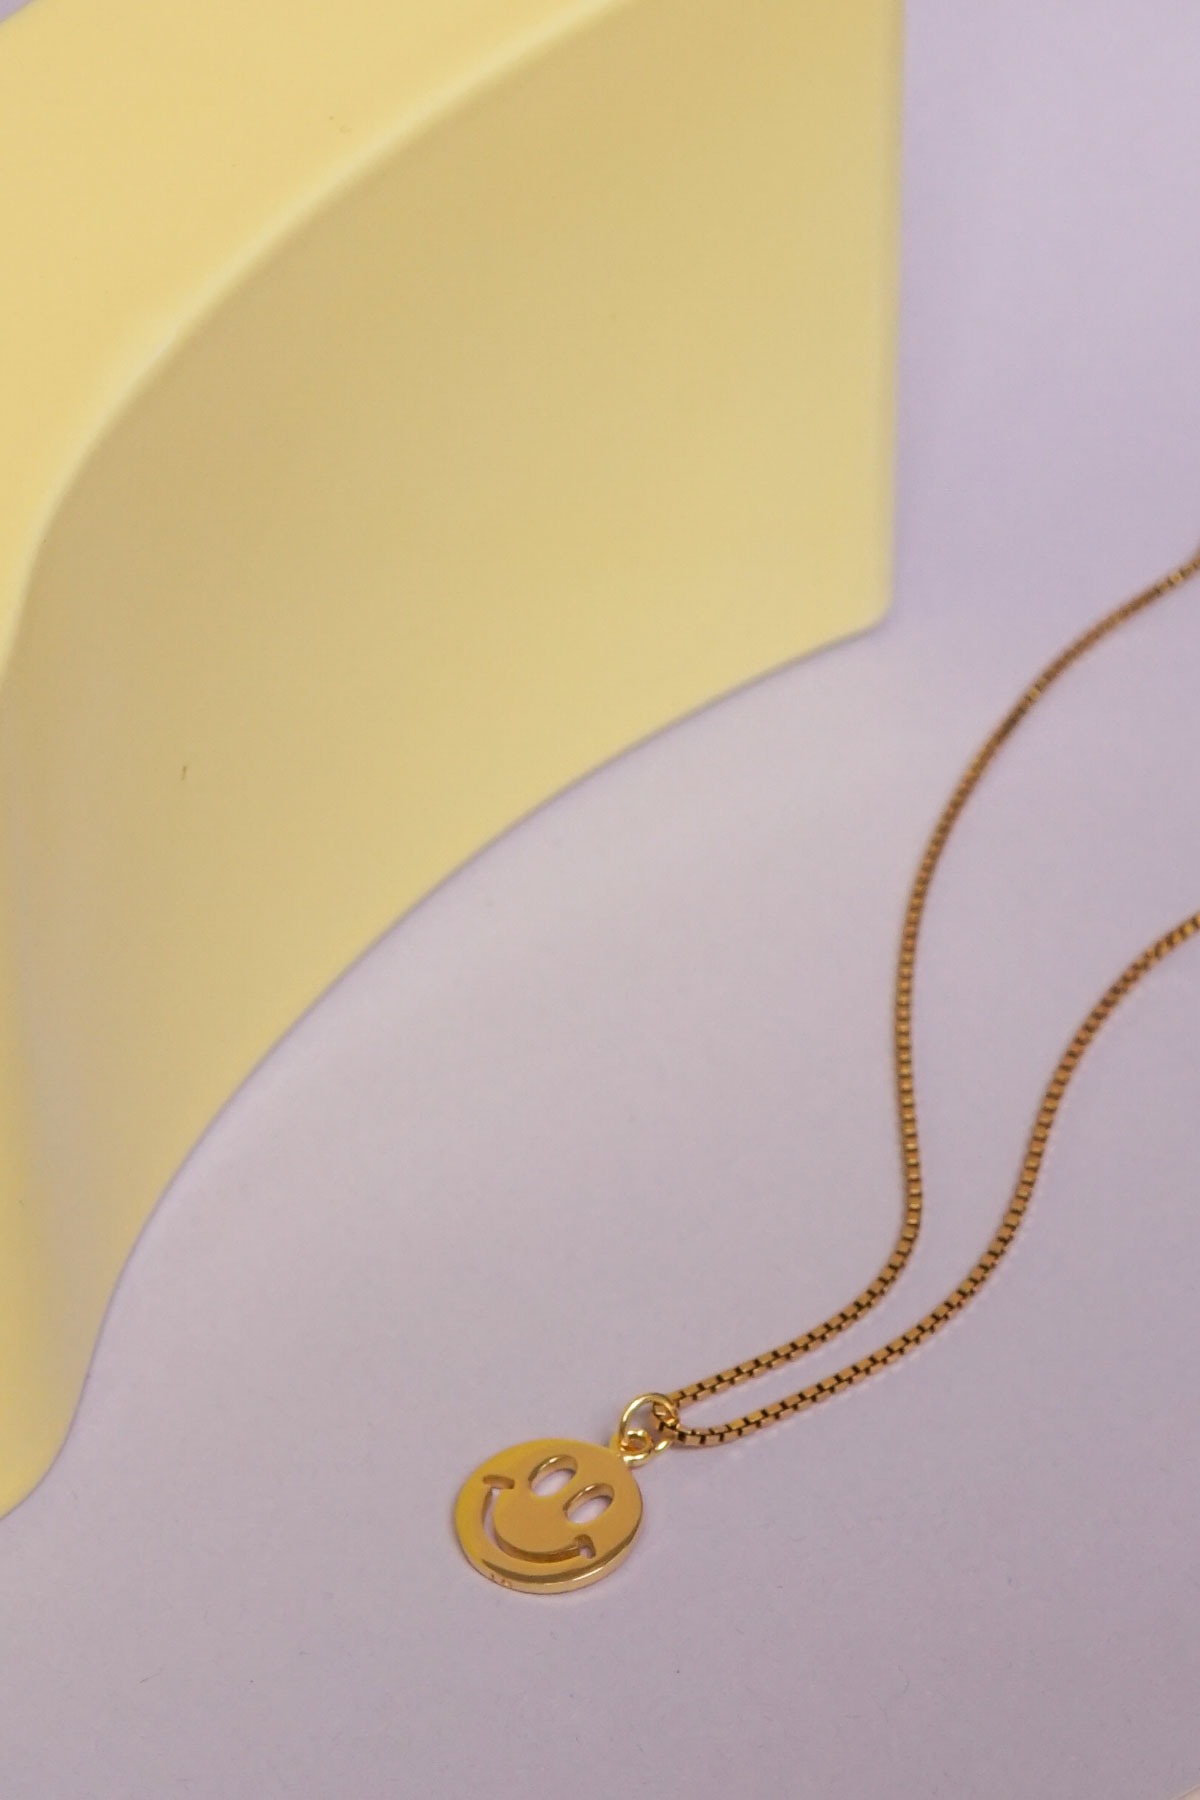 wildthings collectables - Smiley necklace gold plated